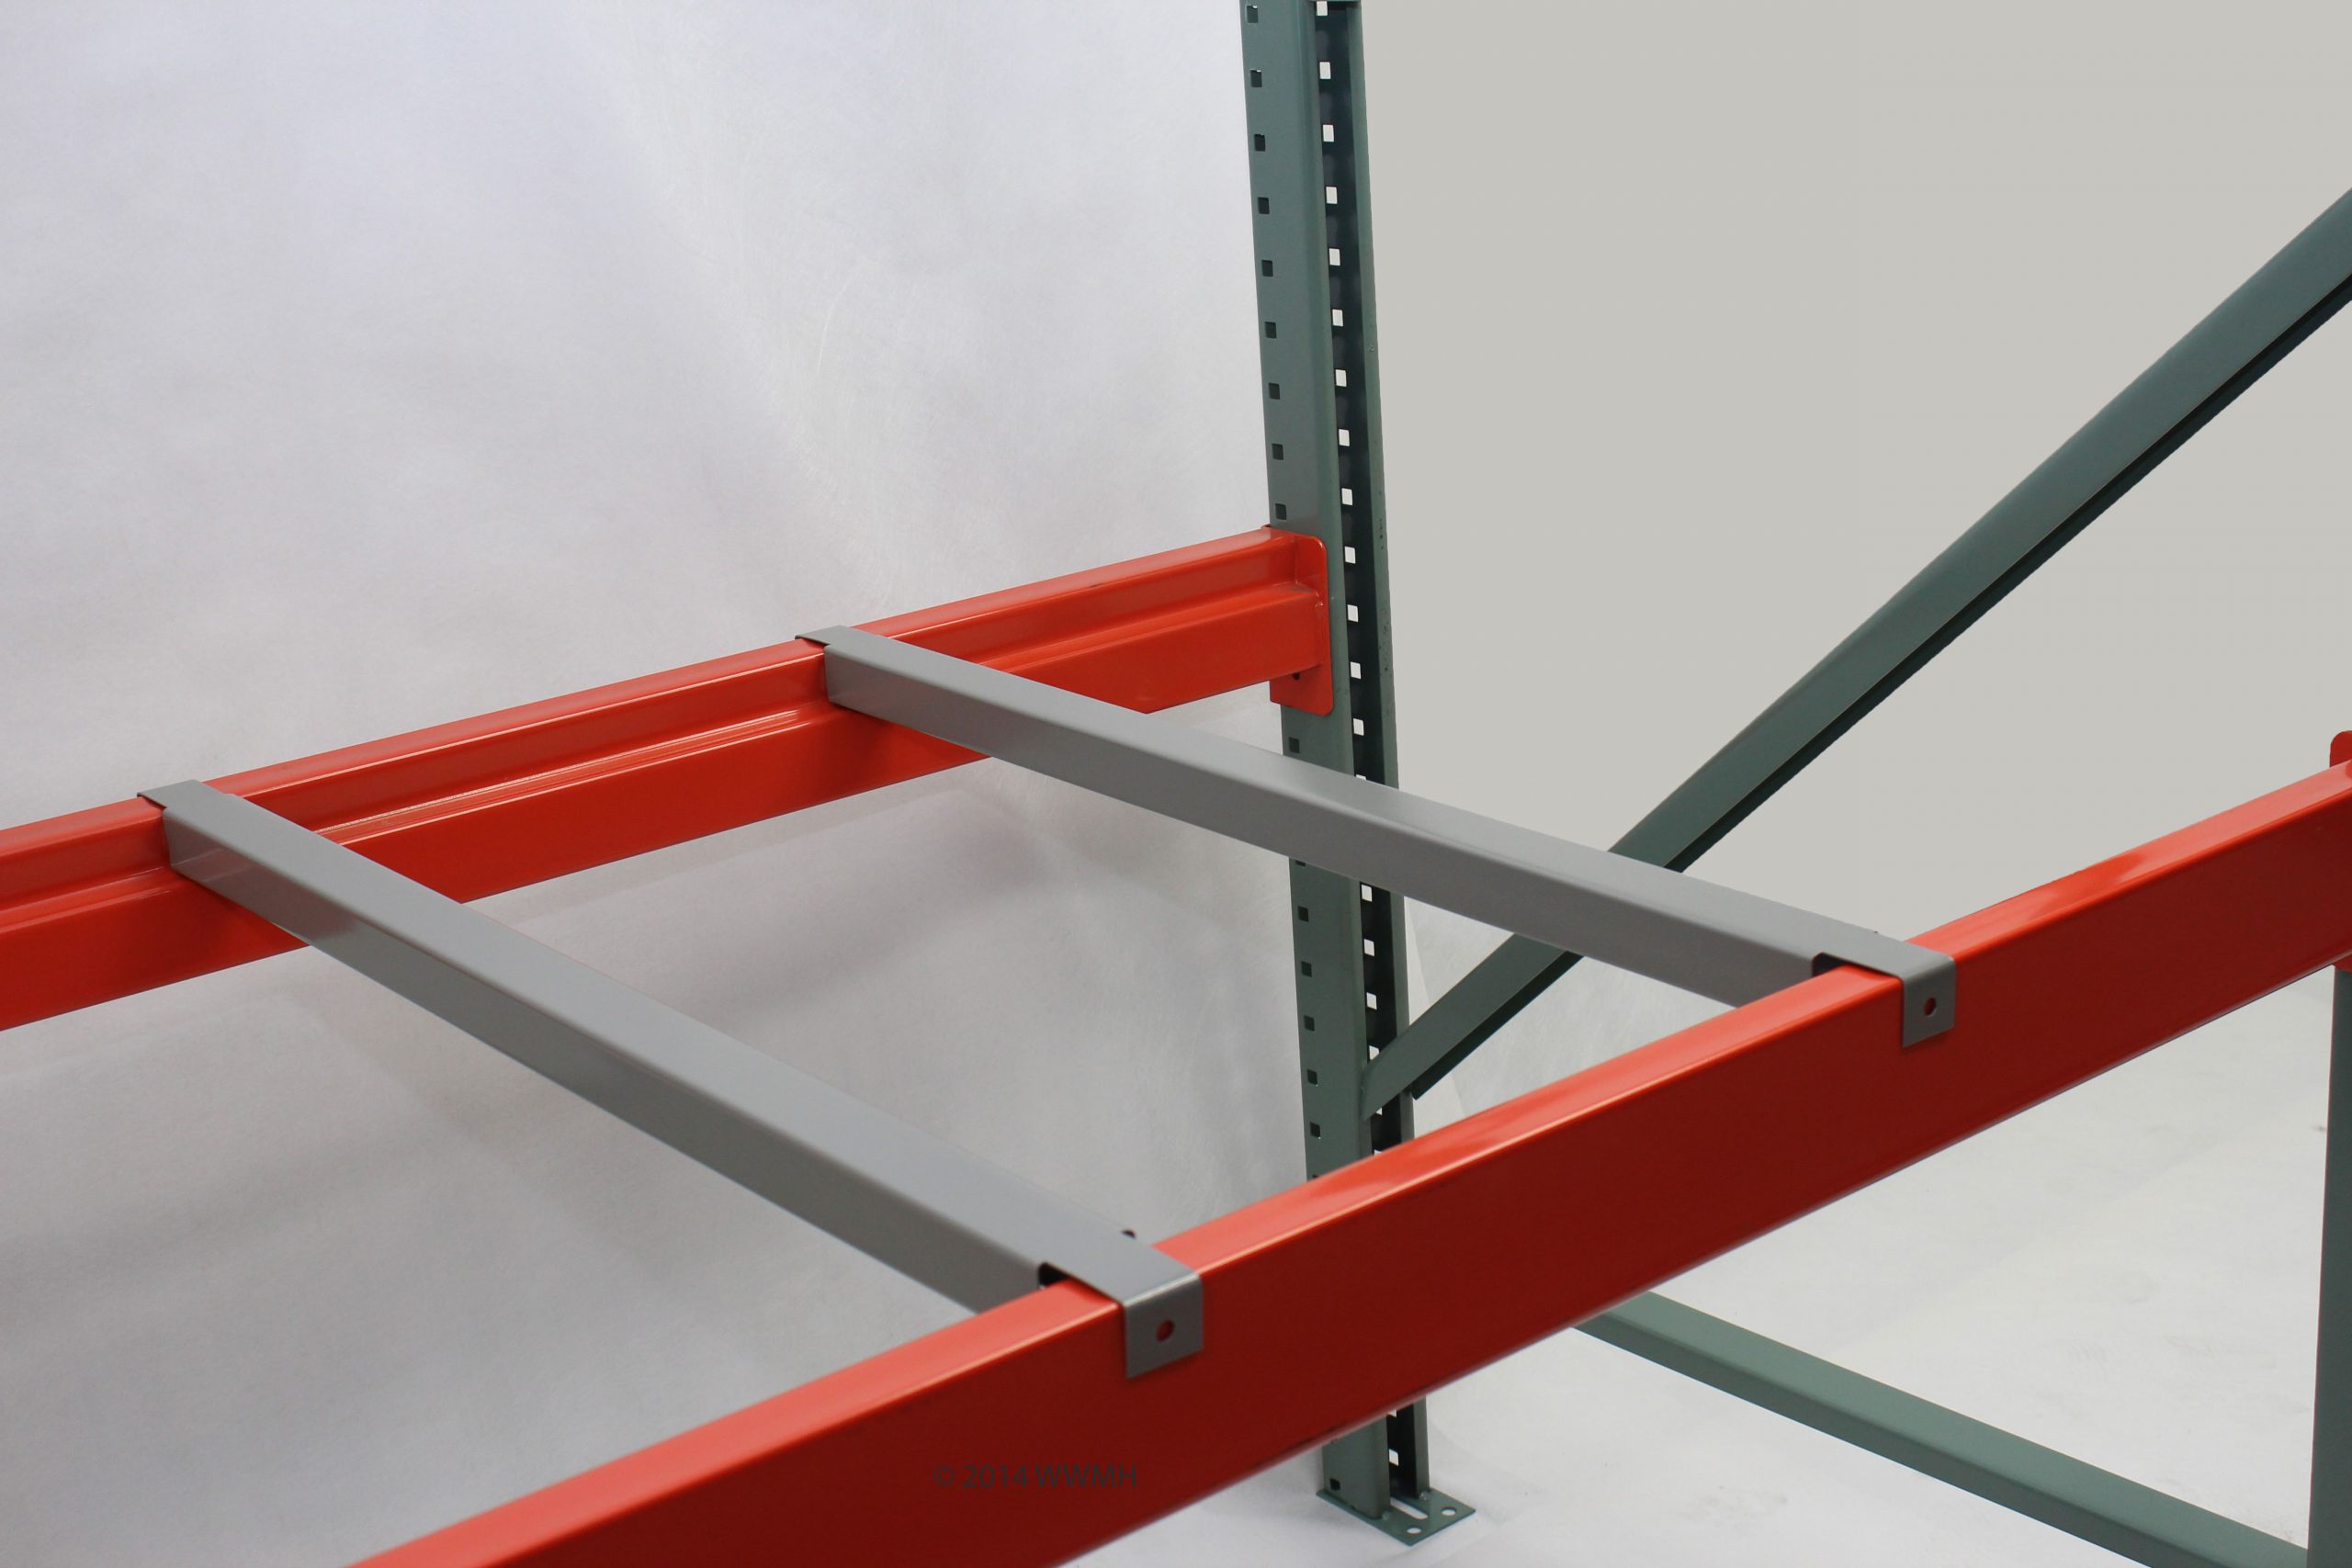 https://www.tpsupplyco.com/cms/wp-content/uploads/2020/10/Double-Flanged-Pallet-Support-2-scaled.jpg